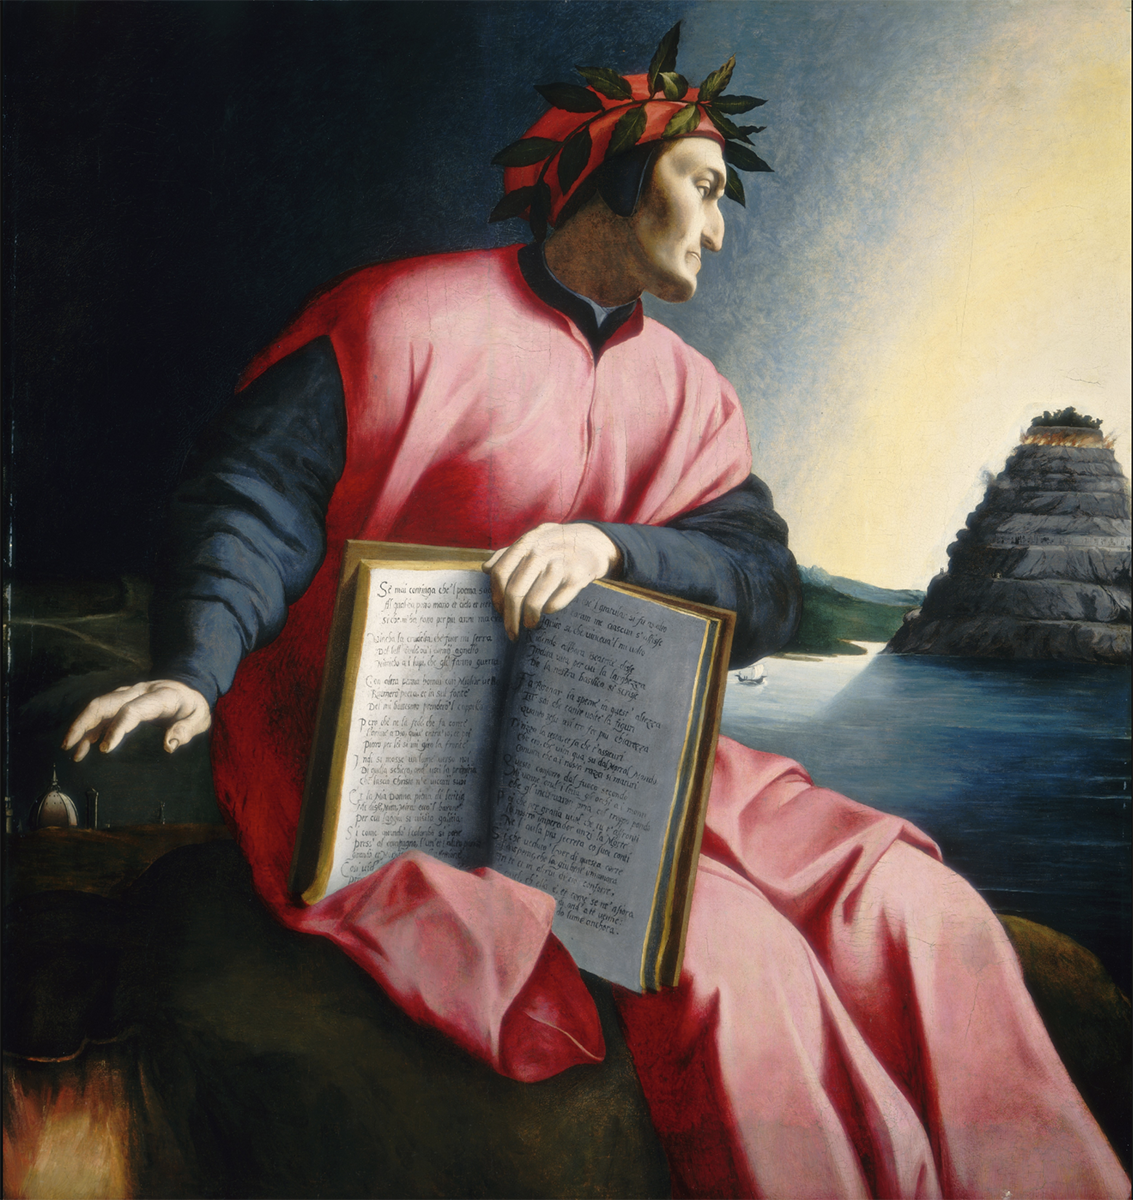 Allegorical Portrait of Dante. the color pink was considered manly in the 16th century